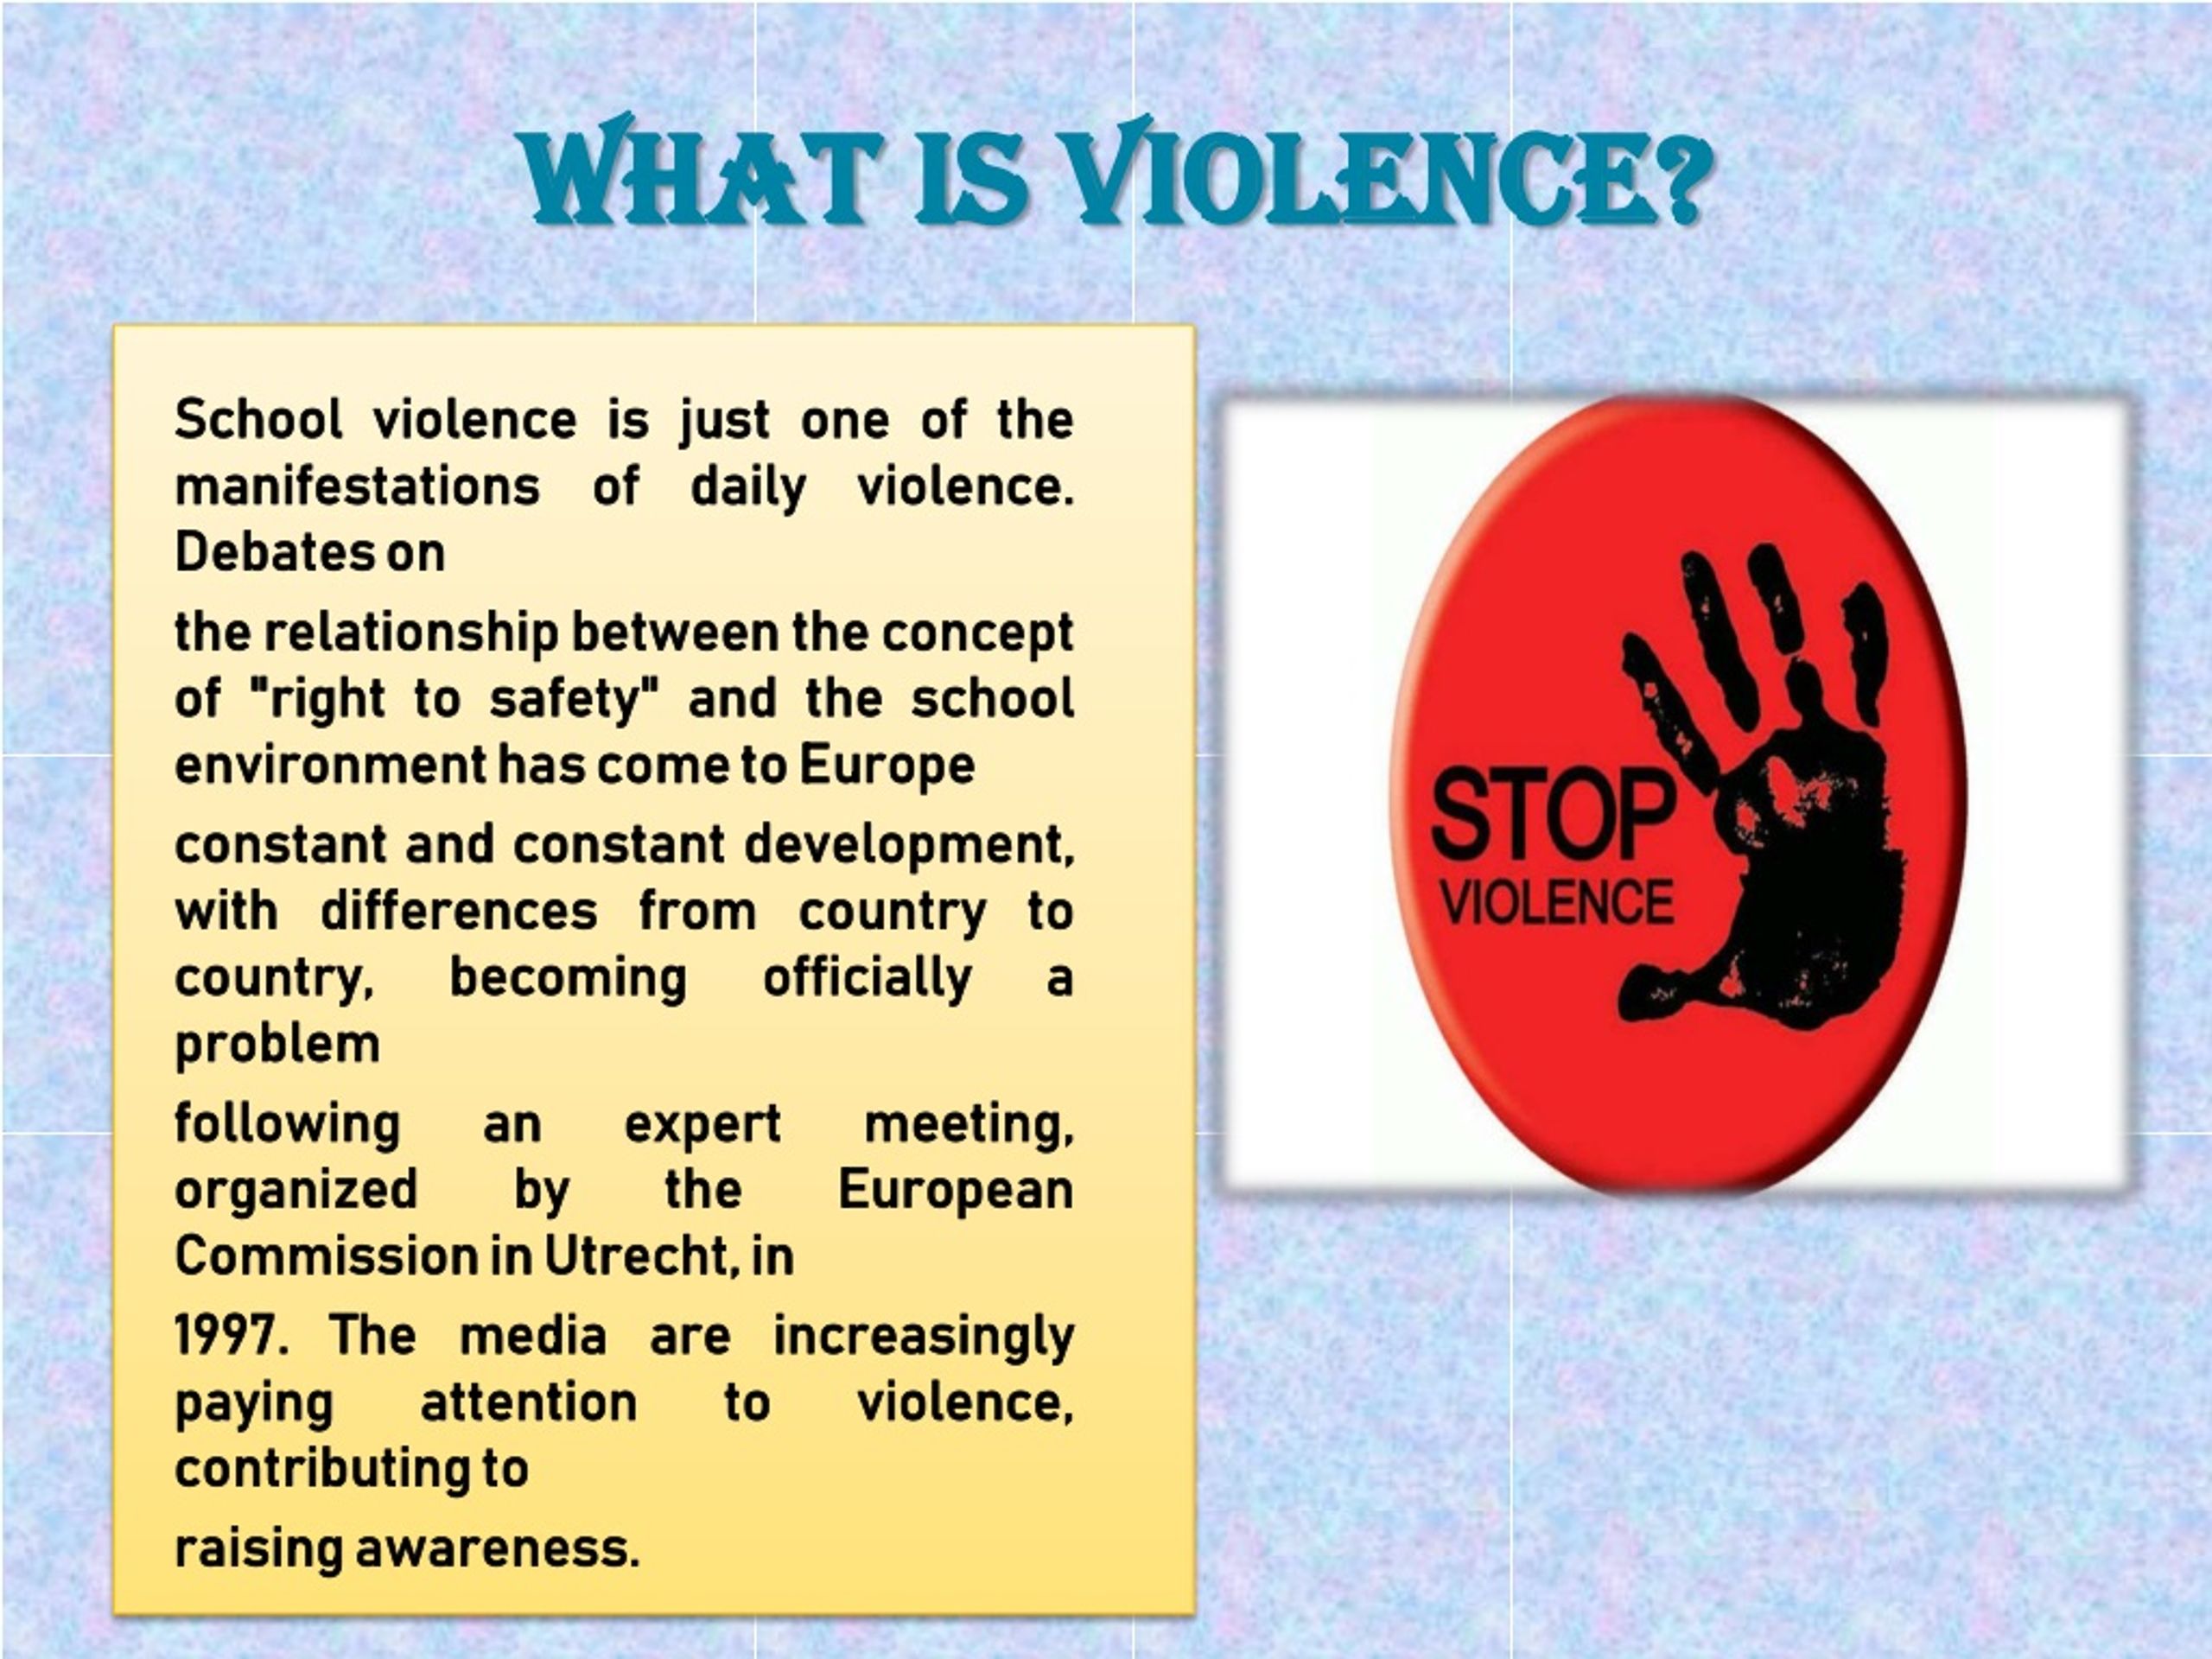 what causes youth violence essay